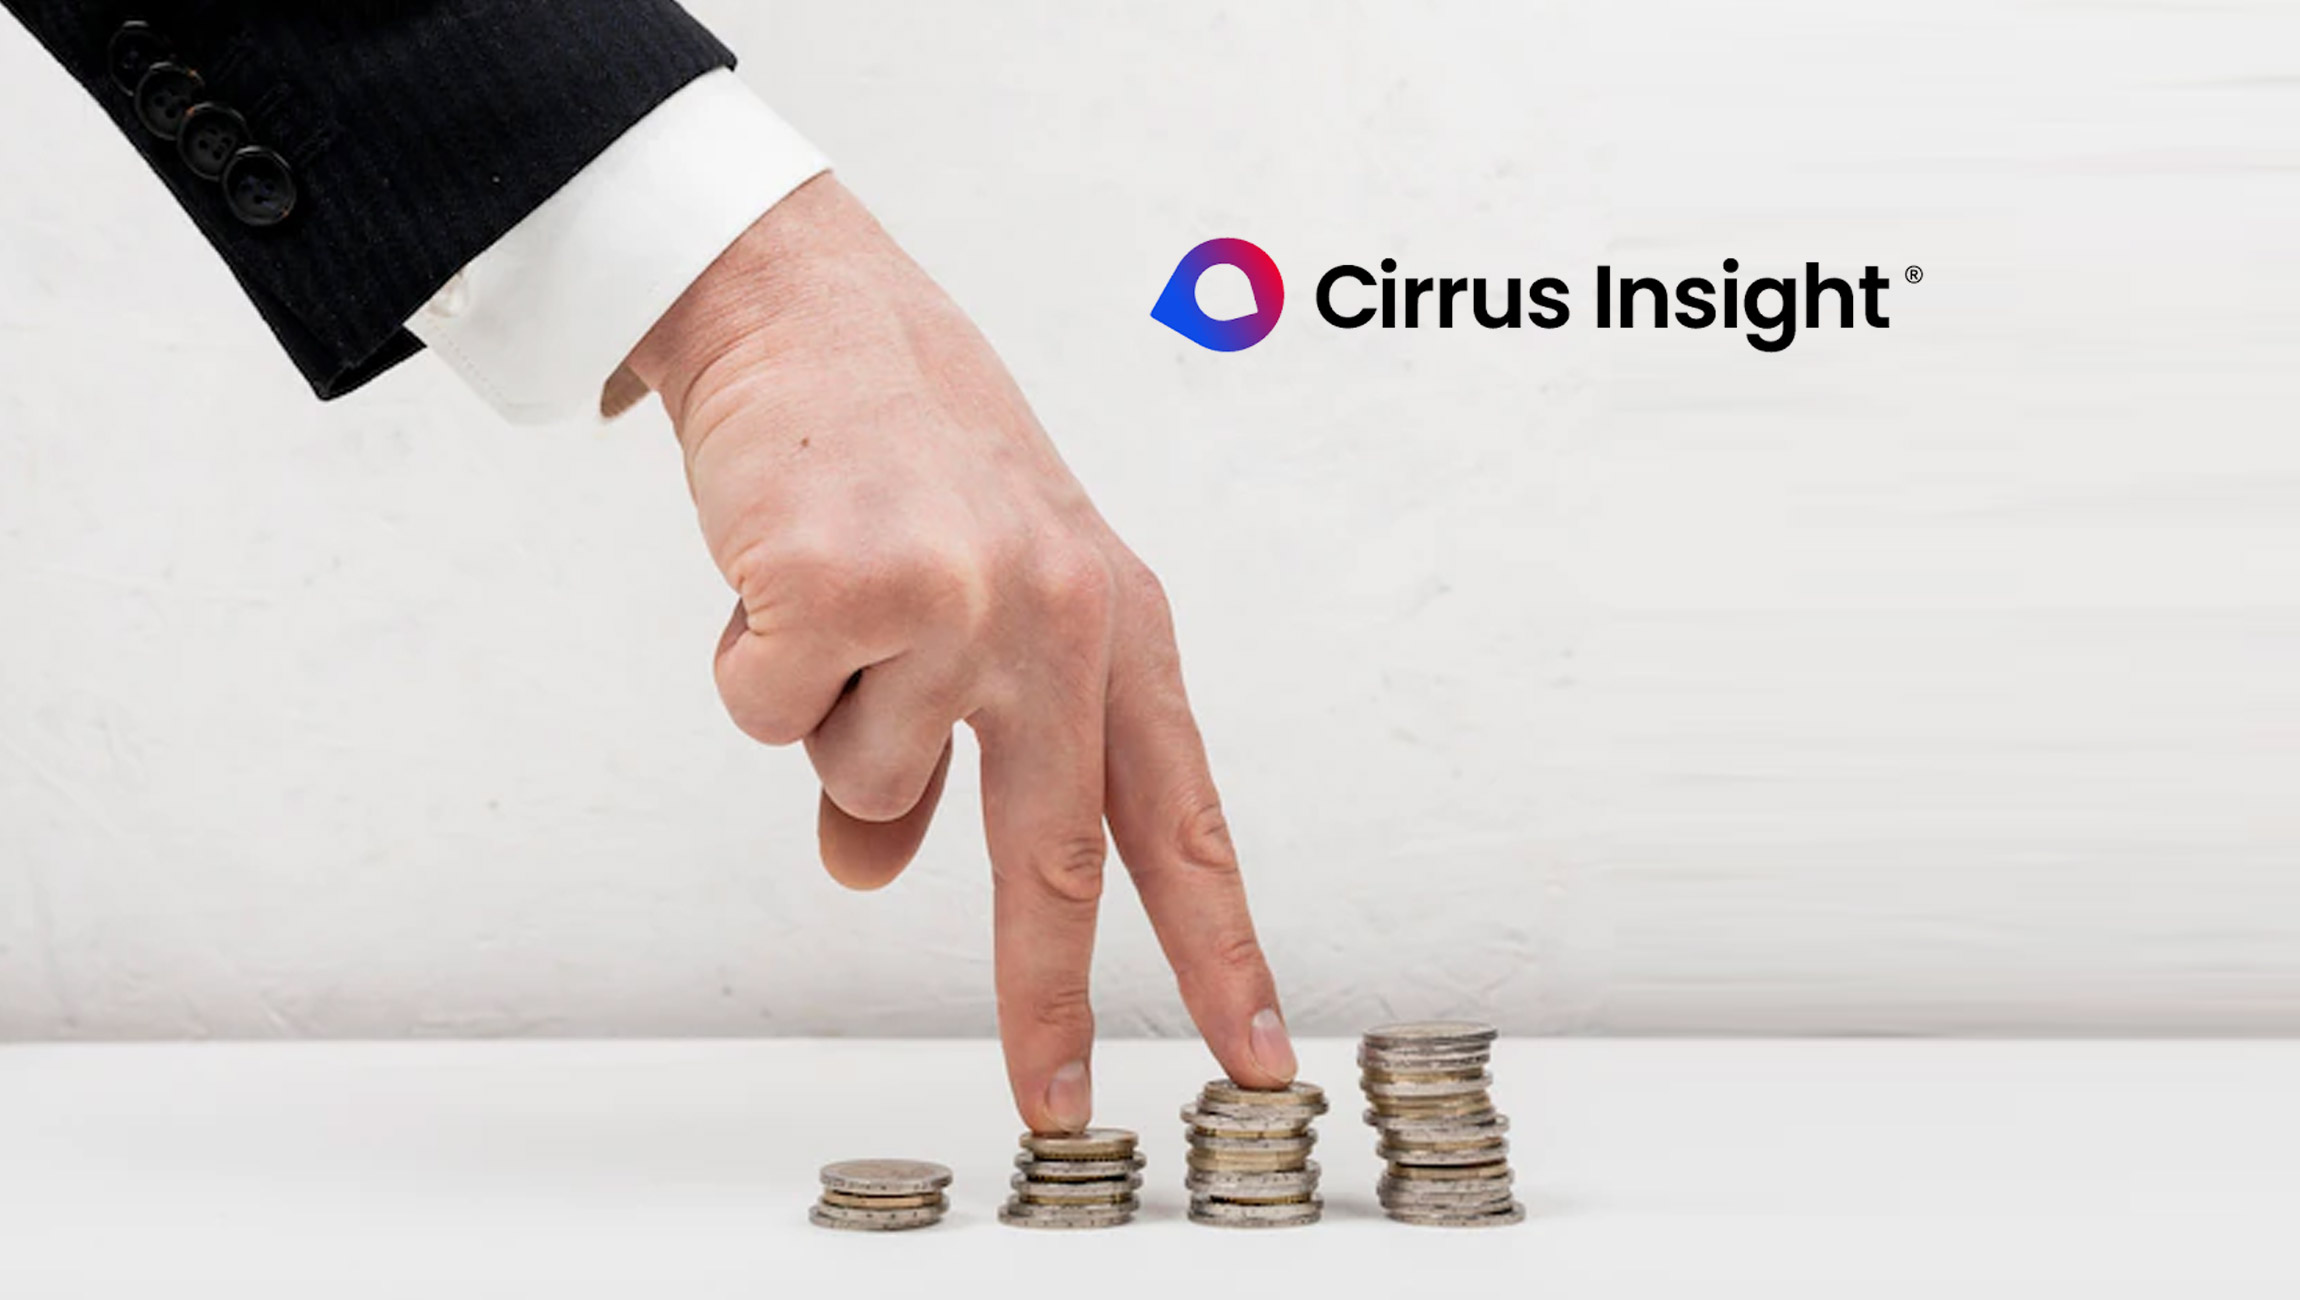 Cirrus Insight Raises 3.5M in Funding to Help Sales Teams Increase Sales Velocity and Enhance Revenue Intelligence